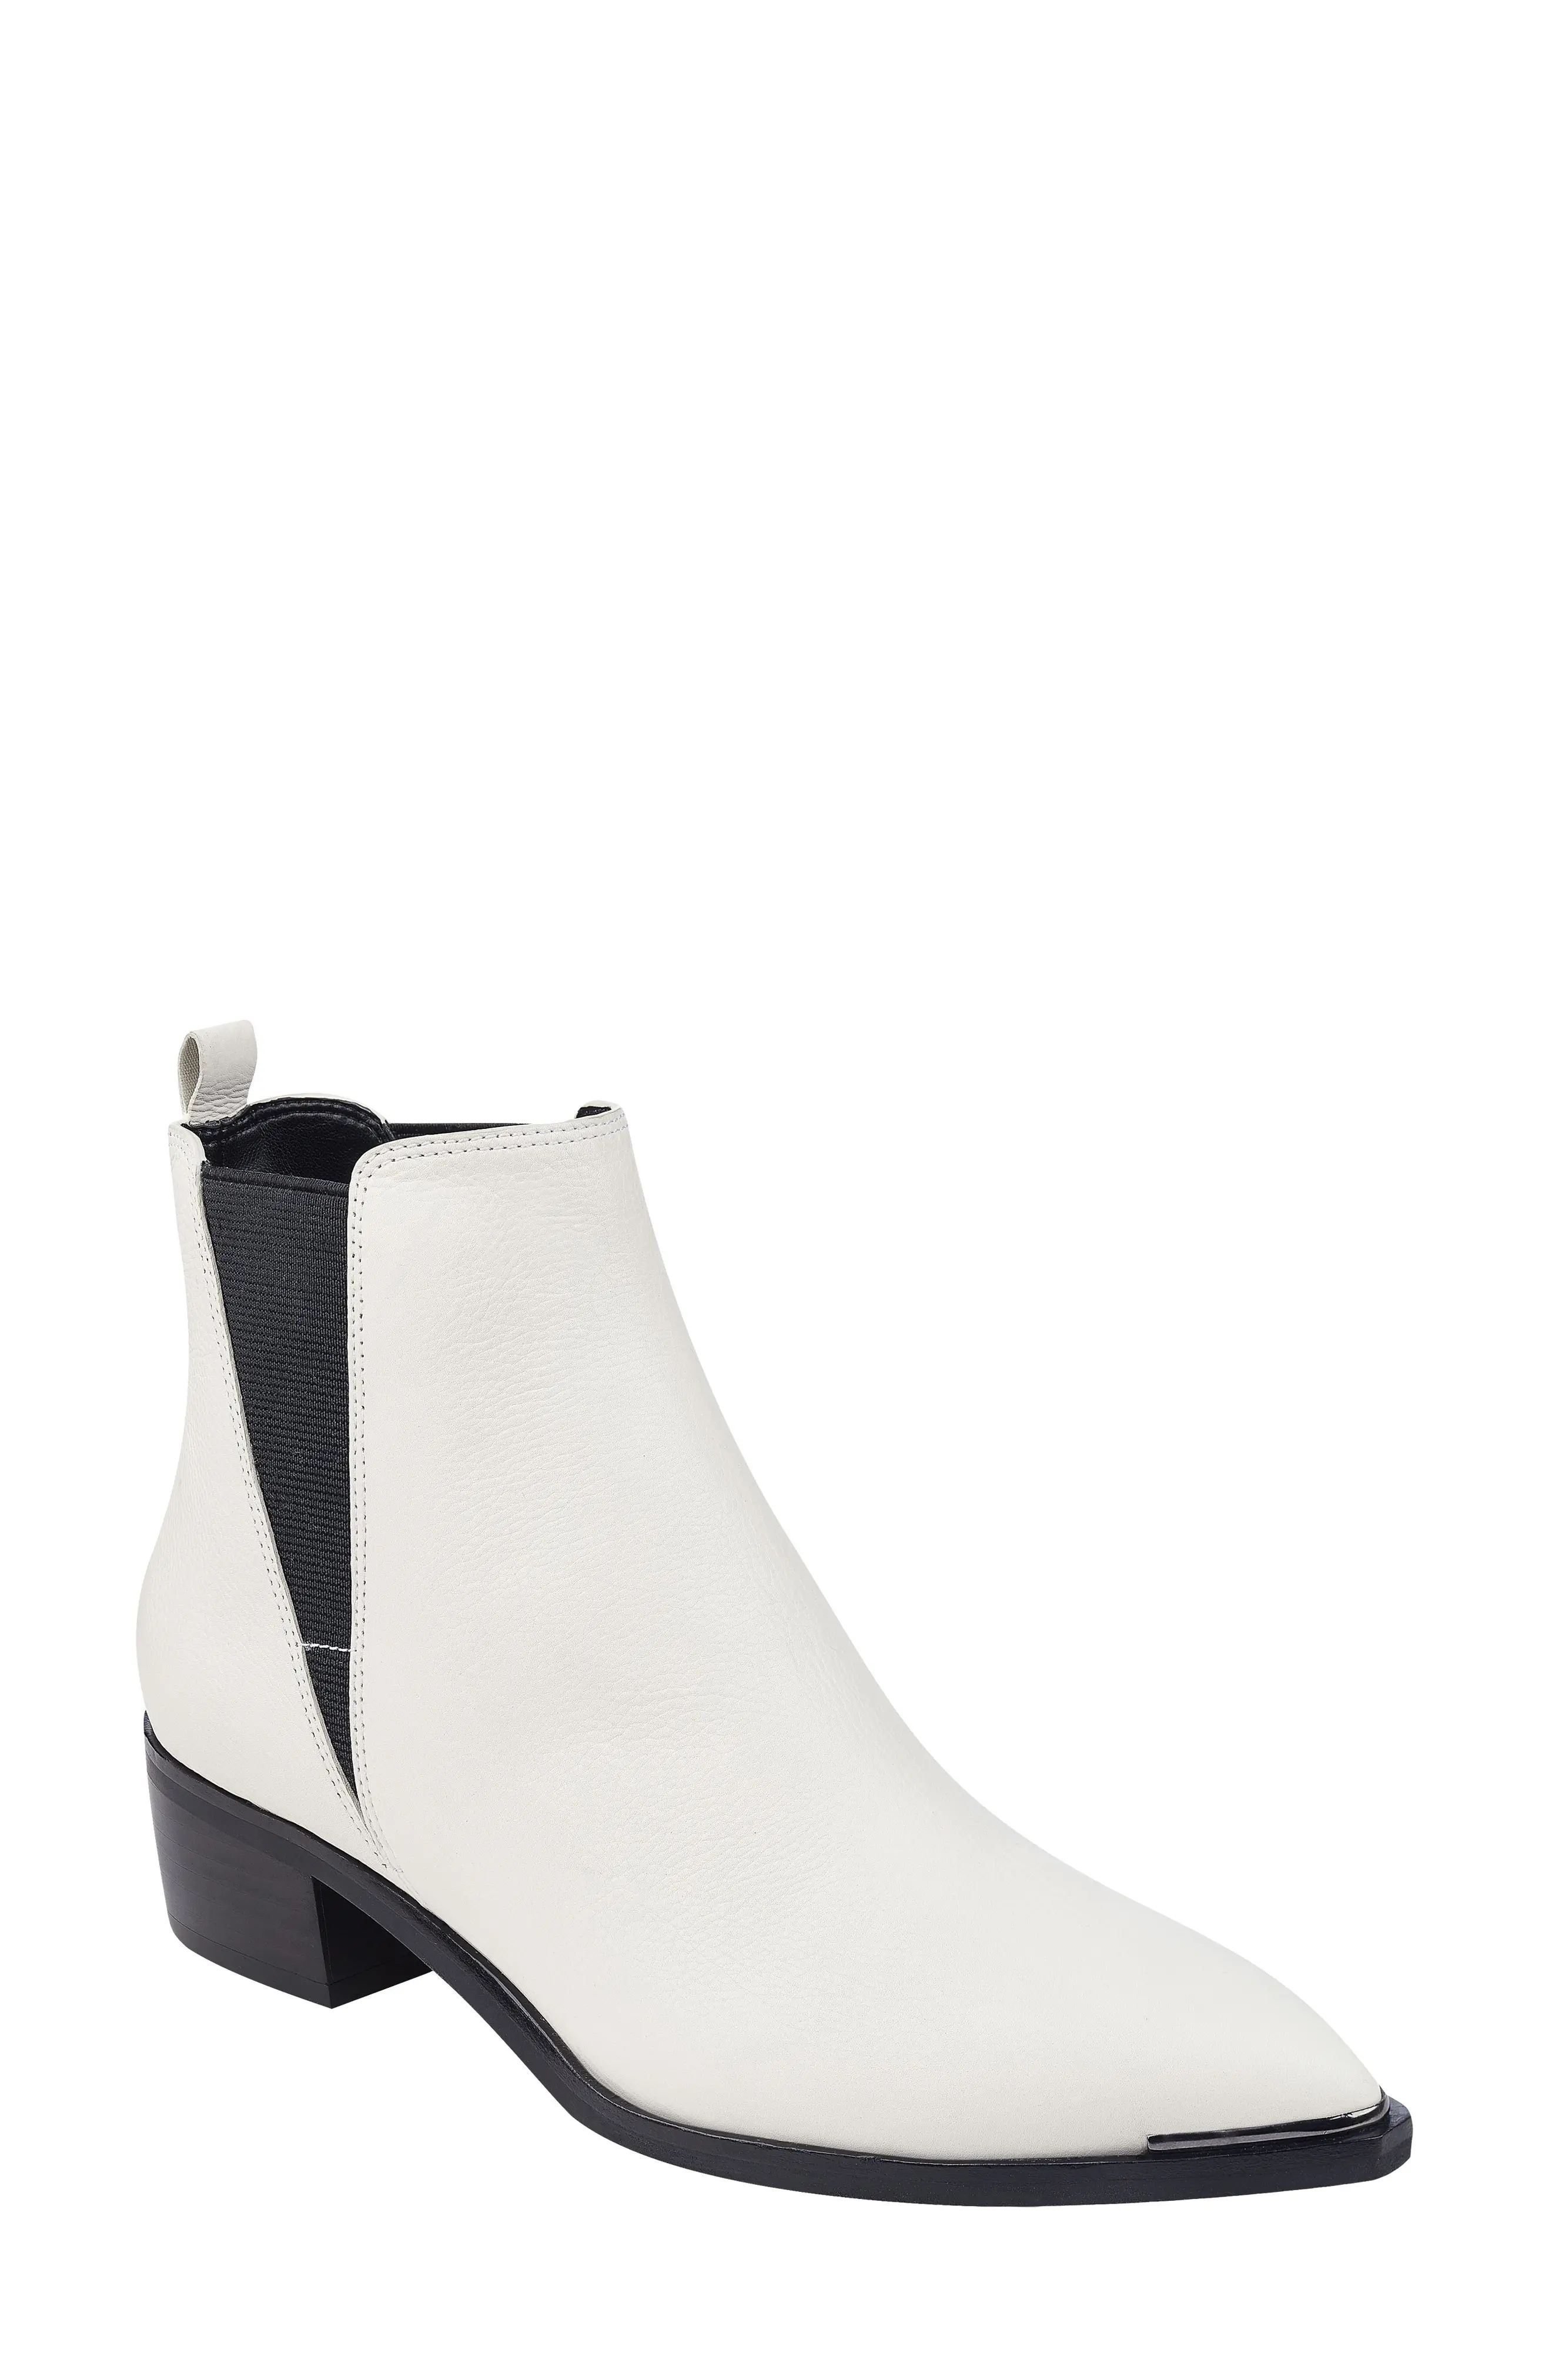 Women's Marc Fisher Ltd Yale Chelsea Boot, Size 10 M - White | Nordstrom